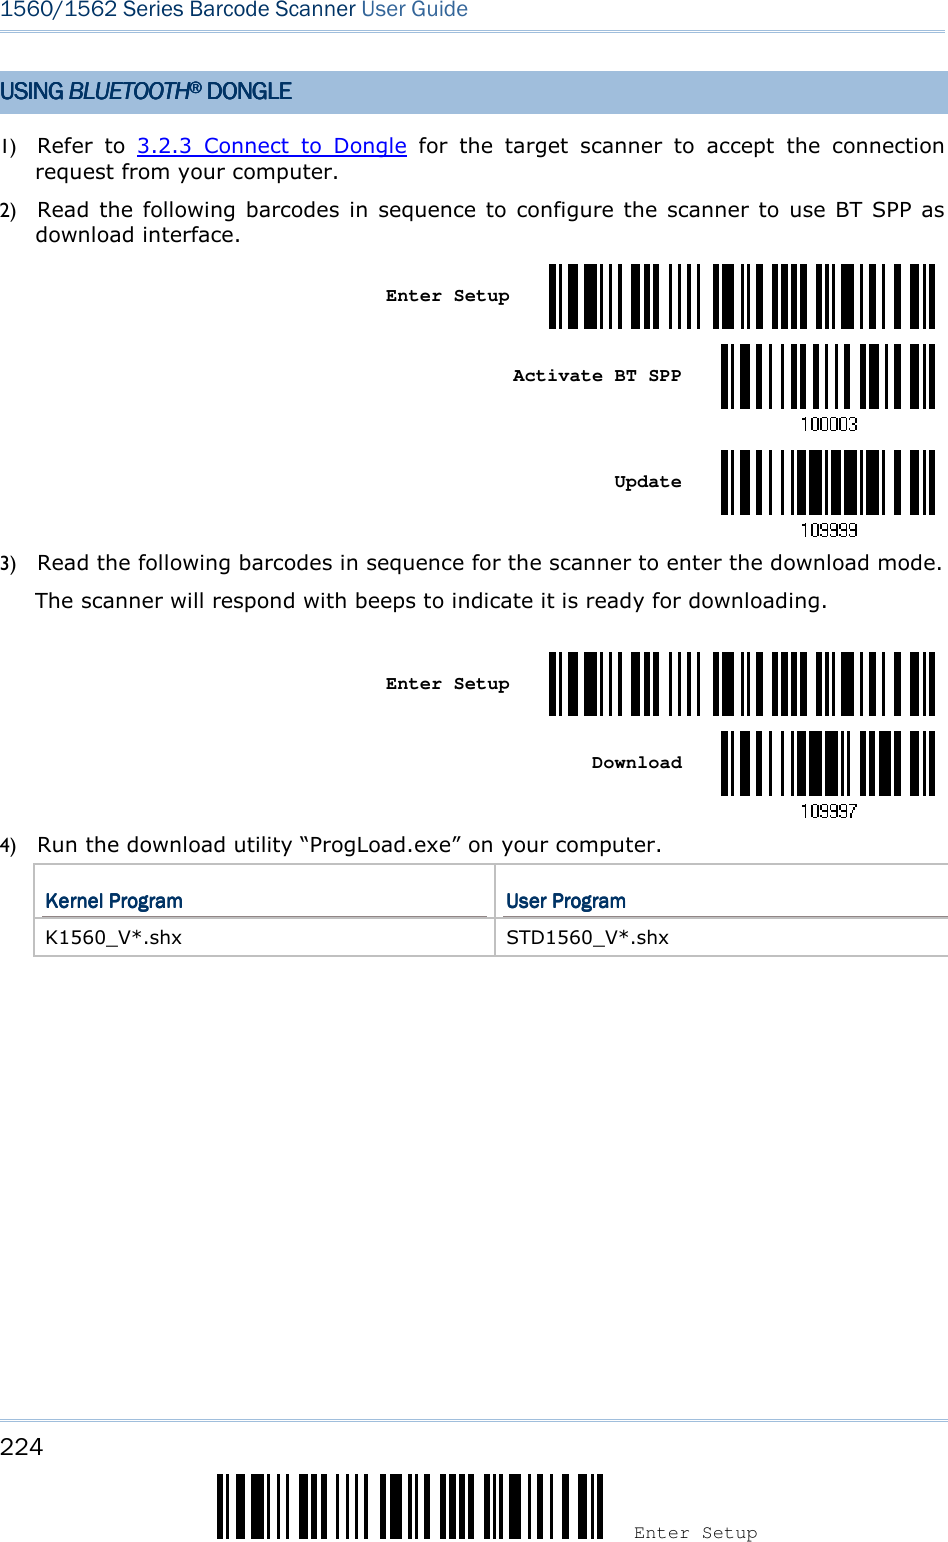 224 Enter Setup 1560/1562 Series Barcode Scanner User Guide  USING USING USING USING BLUETOOTHBLUETOOTHBLUETOOTHBLUETOOTH®®®®    DONGLEDONGLEDONGLEDONGLE    1) Refer  to  3.2.3  Connect  to  Dongle  for  the  target  scanner  to  accept  the  connection request from your computer. 2) Read  the following barcodes in  sequence to  configure the scanner to use BT  SPP  as download interface.   Enter Setup     Activate BT SPP     Update  3) Read the following barcodes in sequence for the scanner to enter the download mode.   The scanner will respond with beeps to indicate it is ready for downloading.    Enter Setup     Download  4) Run the download utility “ProgLoad.exe” on your computer.   Kernel ProgramKernel ProgramKernel ProgramKernel Program     User ProgramUser ProgramUser ProgramUser Program    K1560_V*.shx  STD1560_V*.shx  